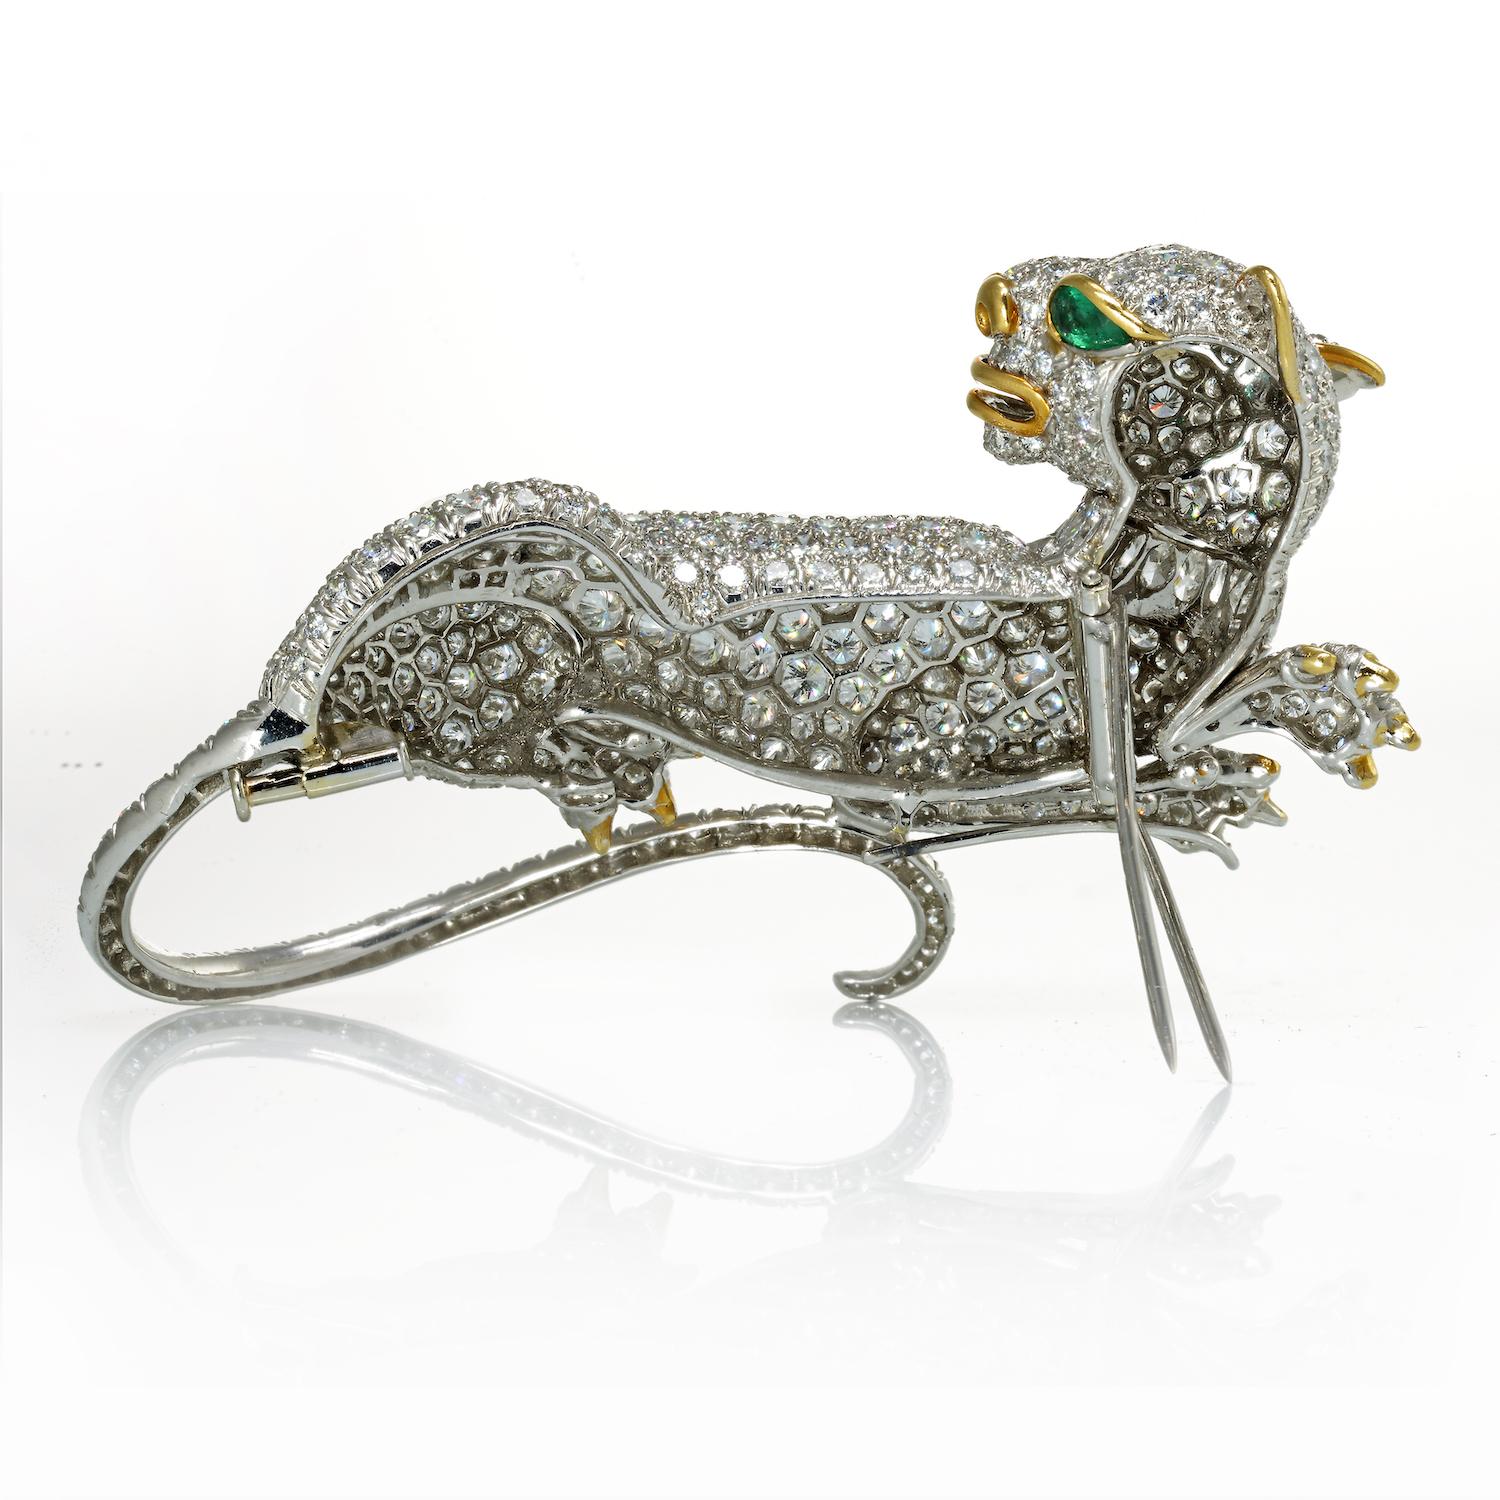 David Webb Platinum Diamond And Emerald Panther Pin Brooch For Sale 3